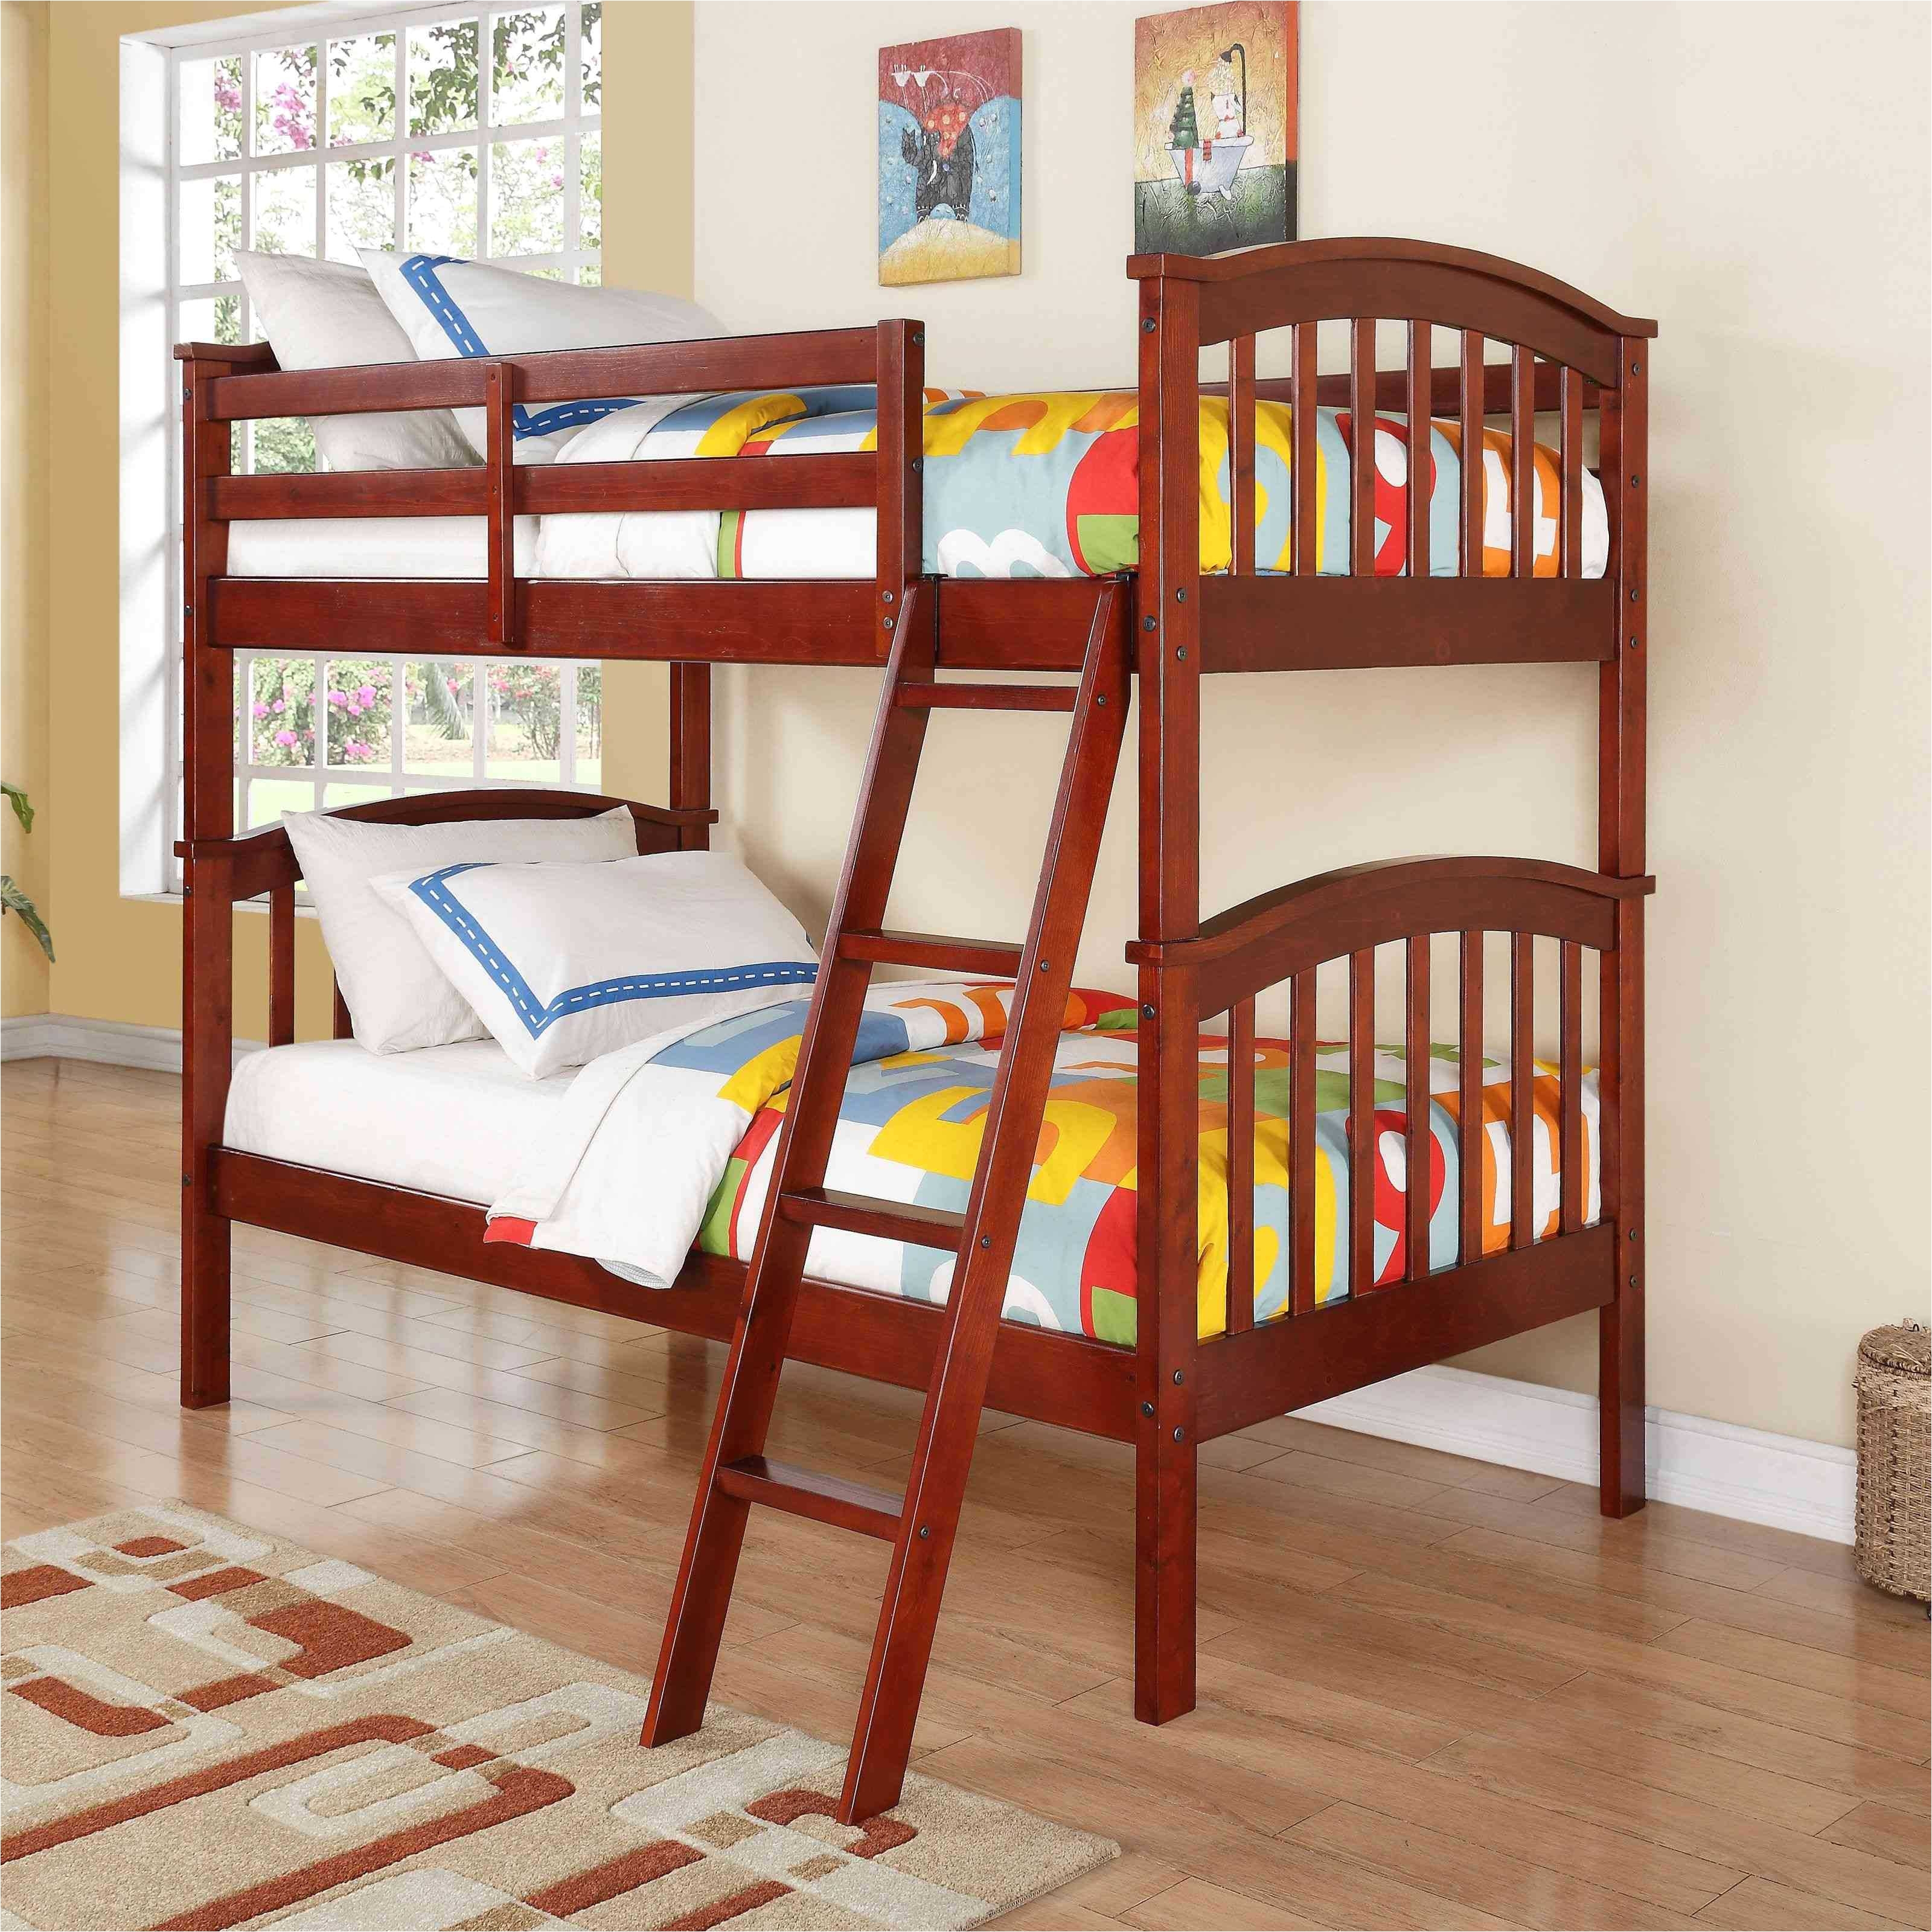 Contemporary Bunk Bed Unique Cheap Beds 0d and Inspirational Bunk with bunk beds for kids